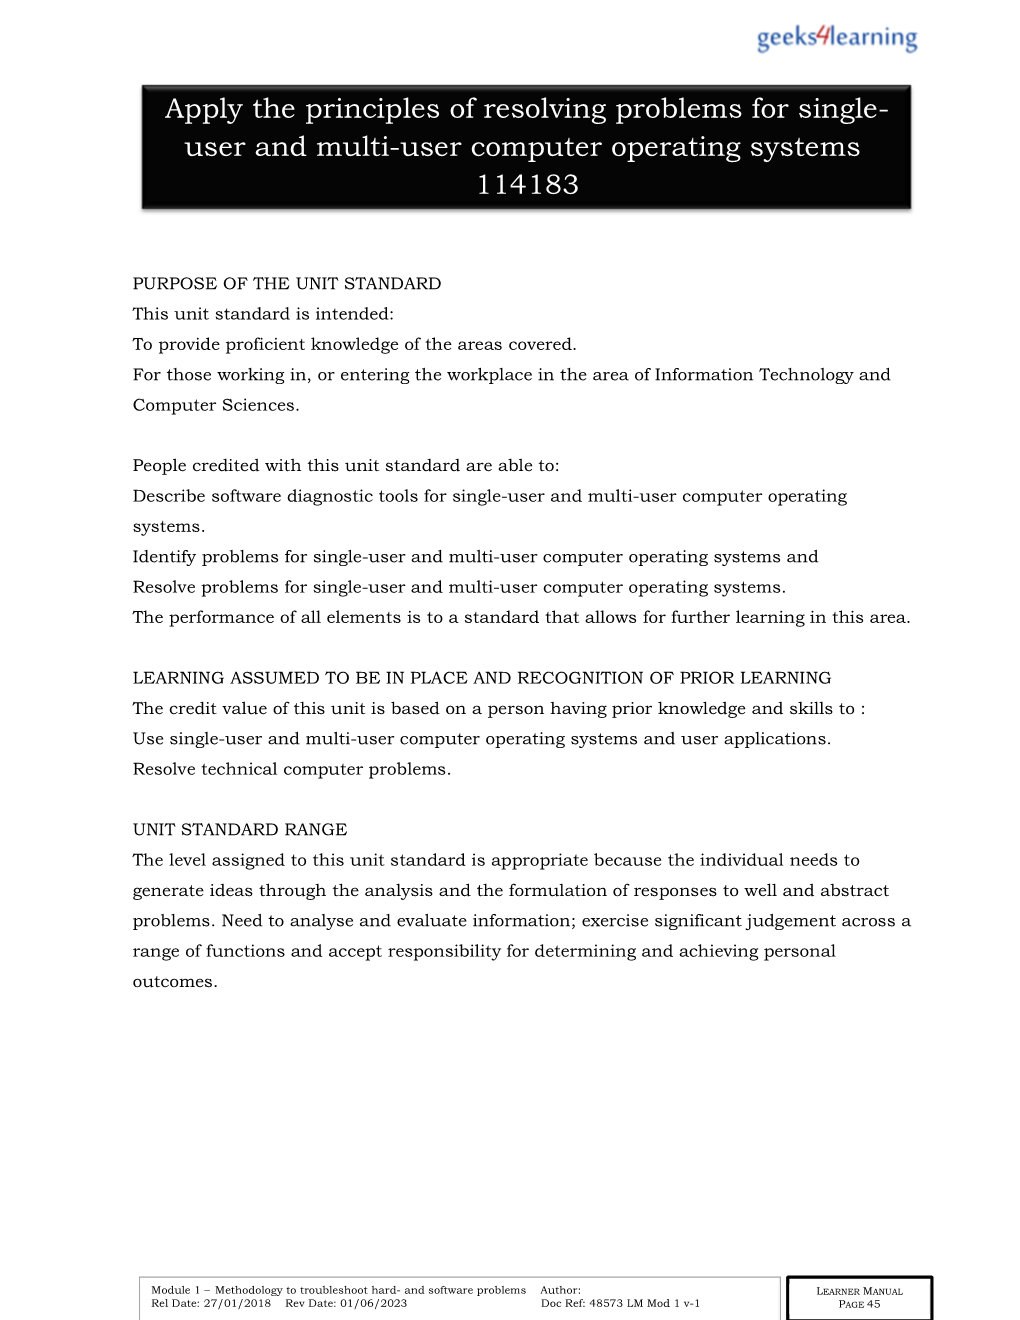 Apply the Principles of Resolving Problems for Single- User and Multi-User Computer Operating Systems 114183